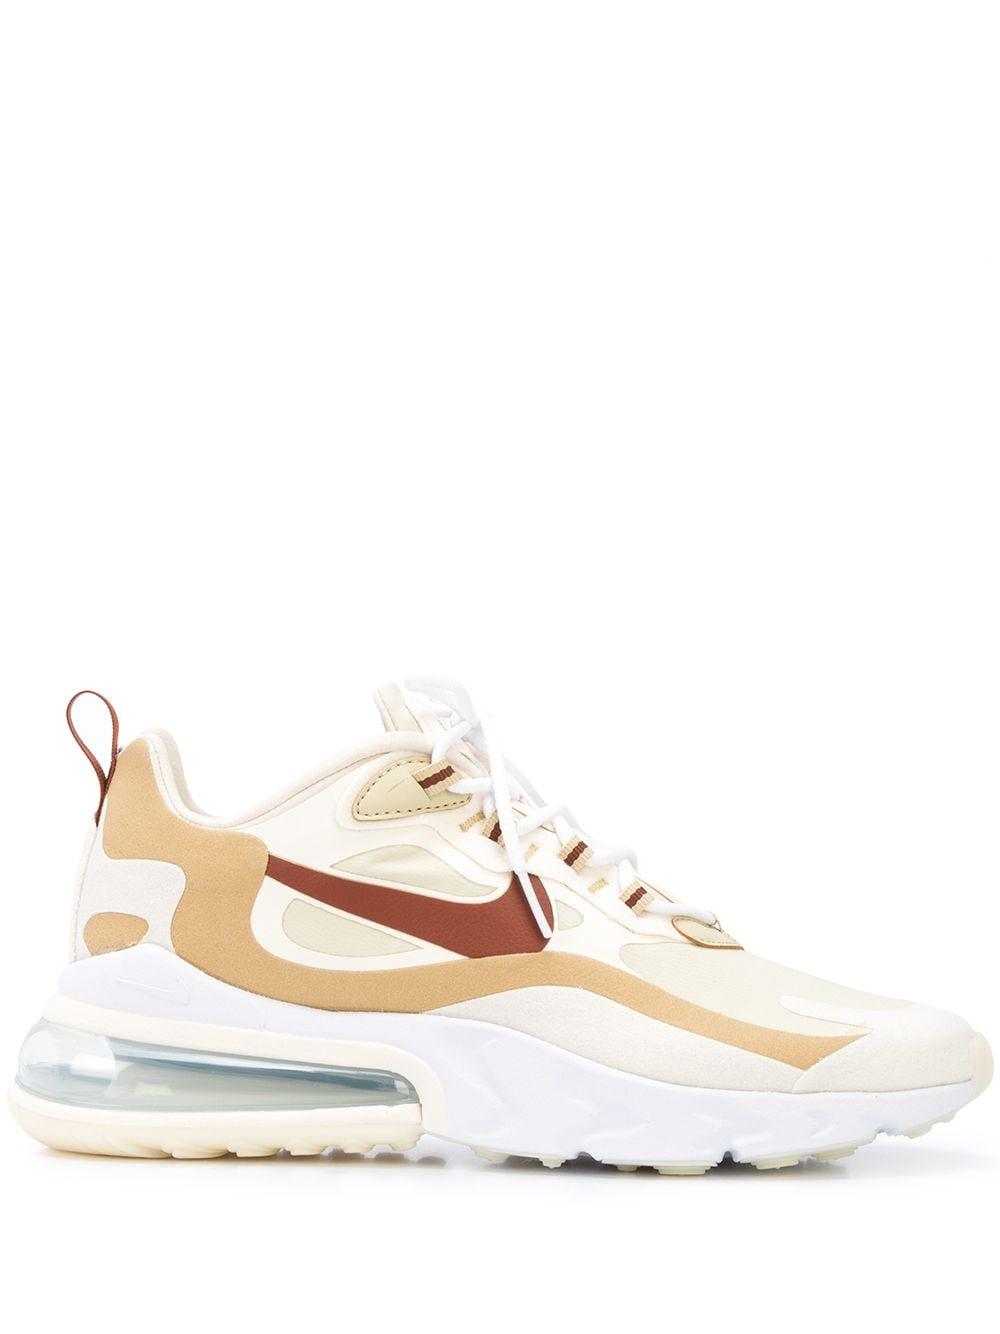 Nike Leather Air Max 270 React Chunky Heel Sneakers | Lyst